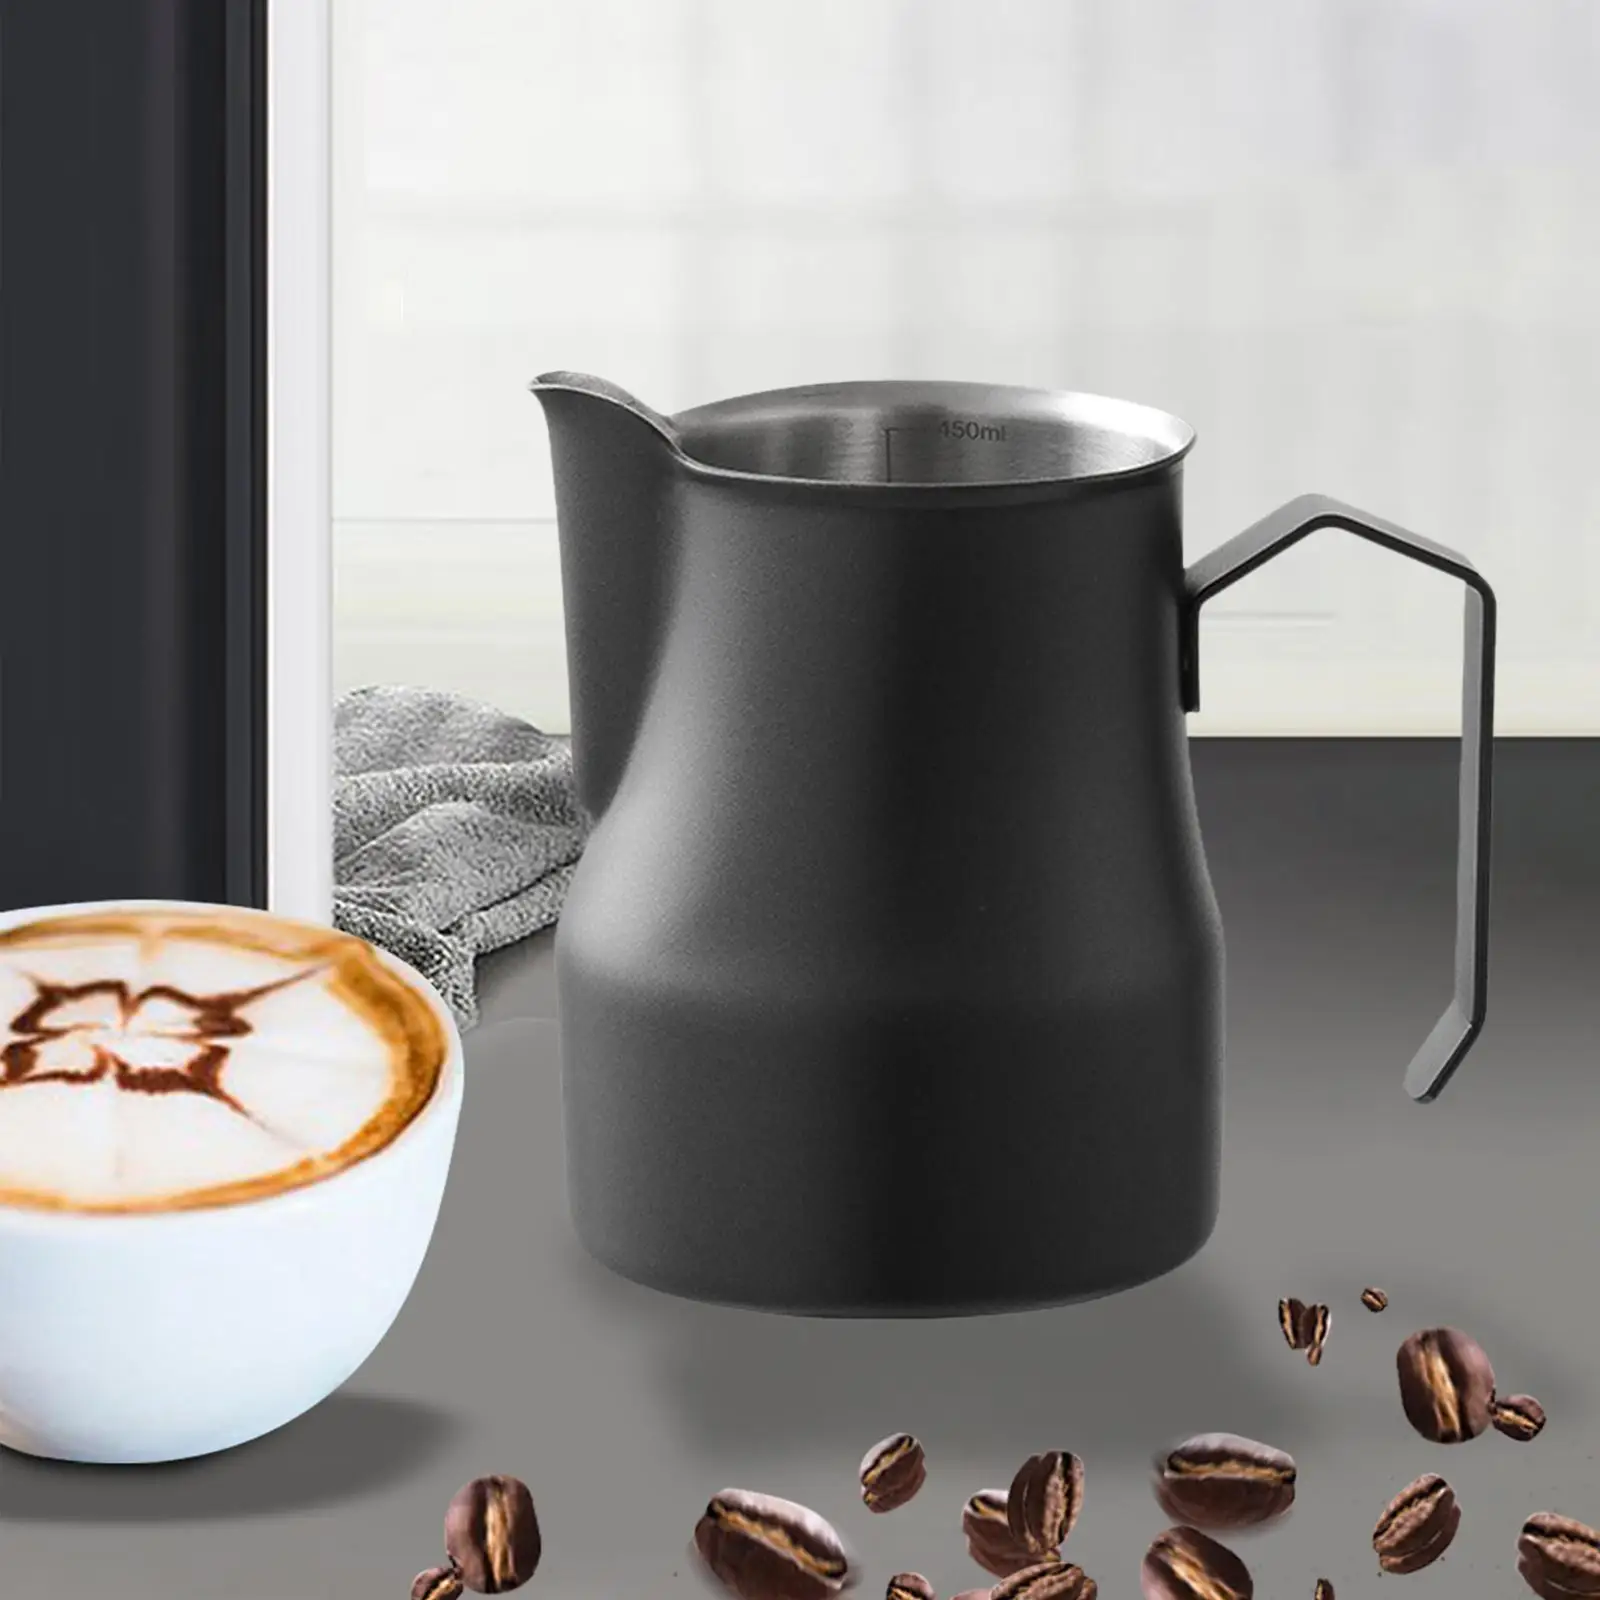 Milk Frothing Pitcher Stainless Steel Milk Frother Cup with Scale Espresso Steaming Pitcher for Lattes Cappuccino coffee